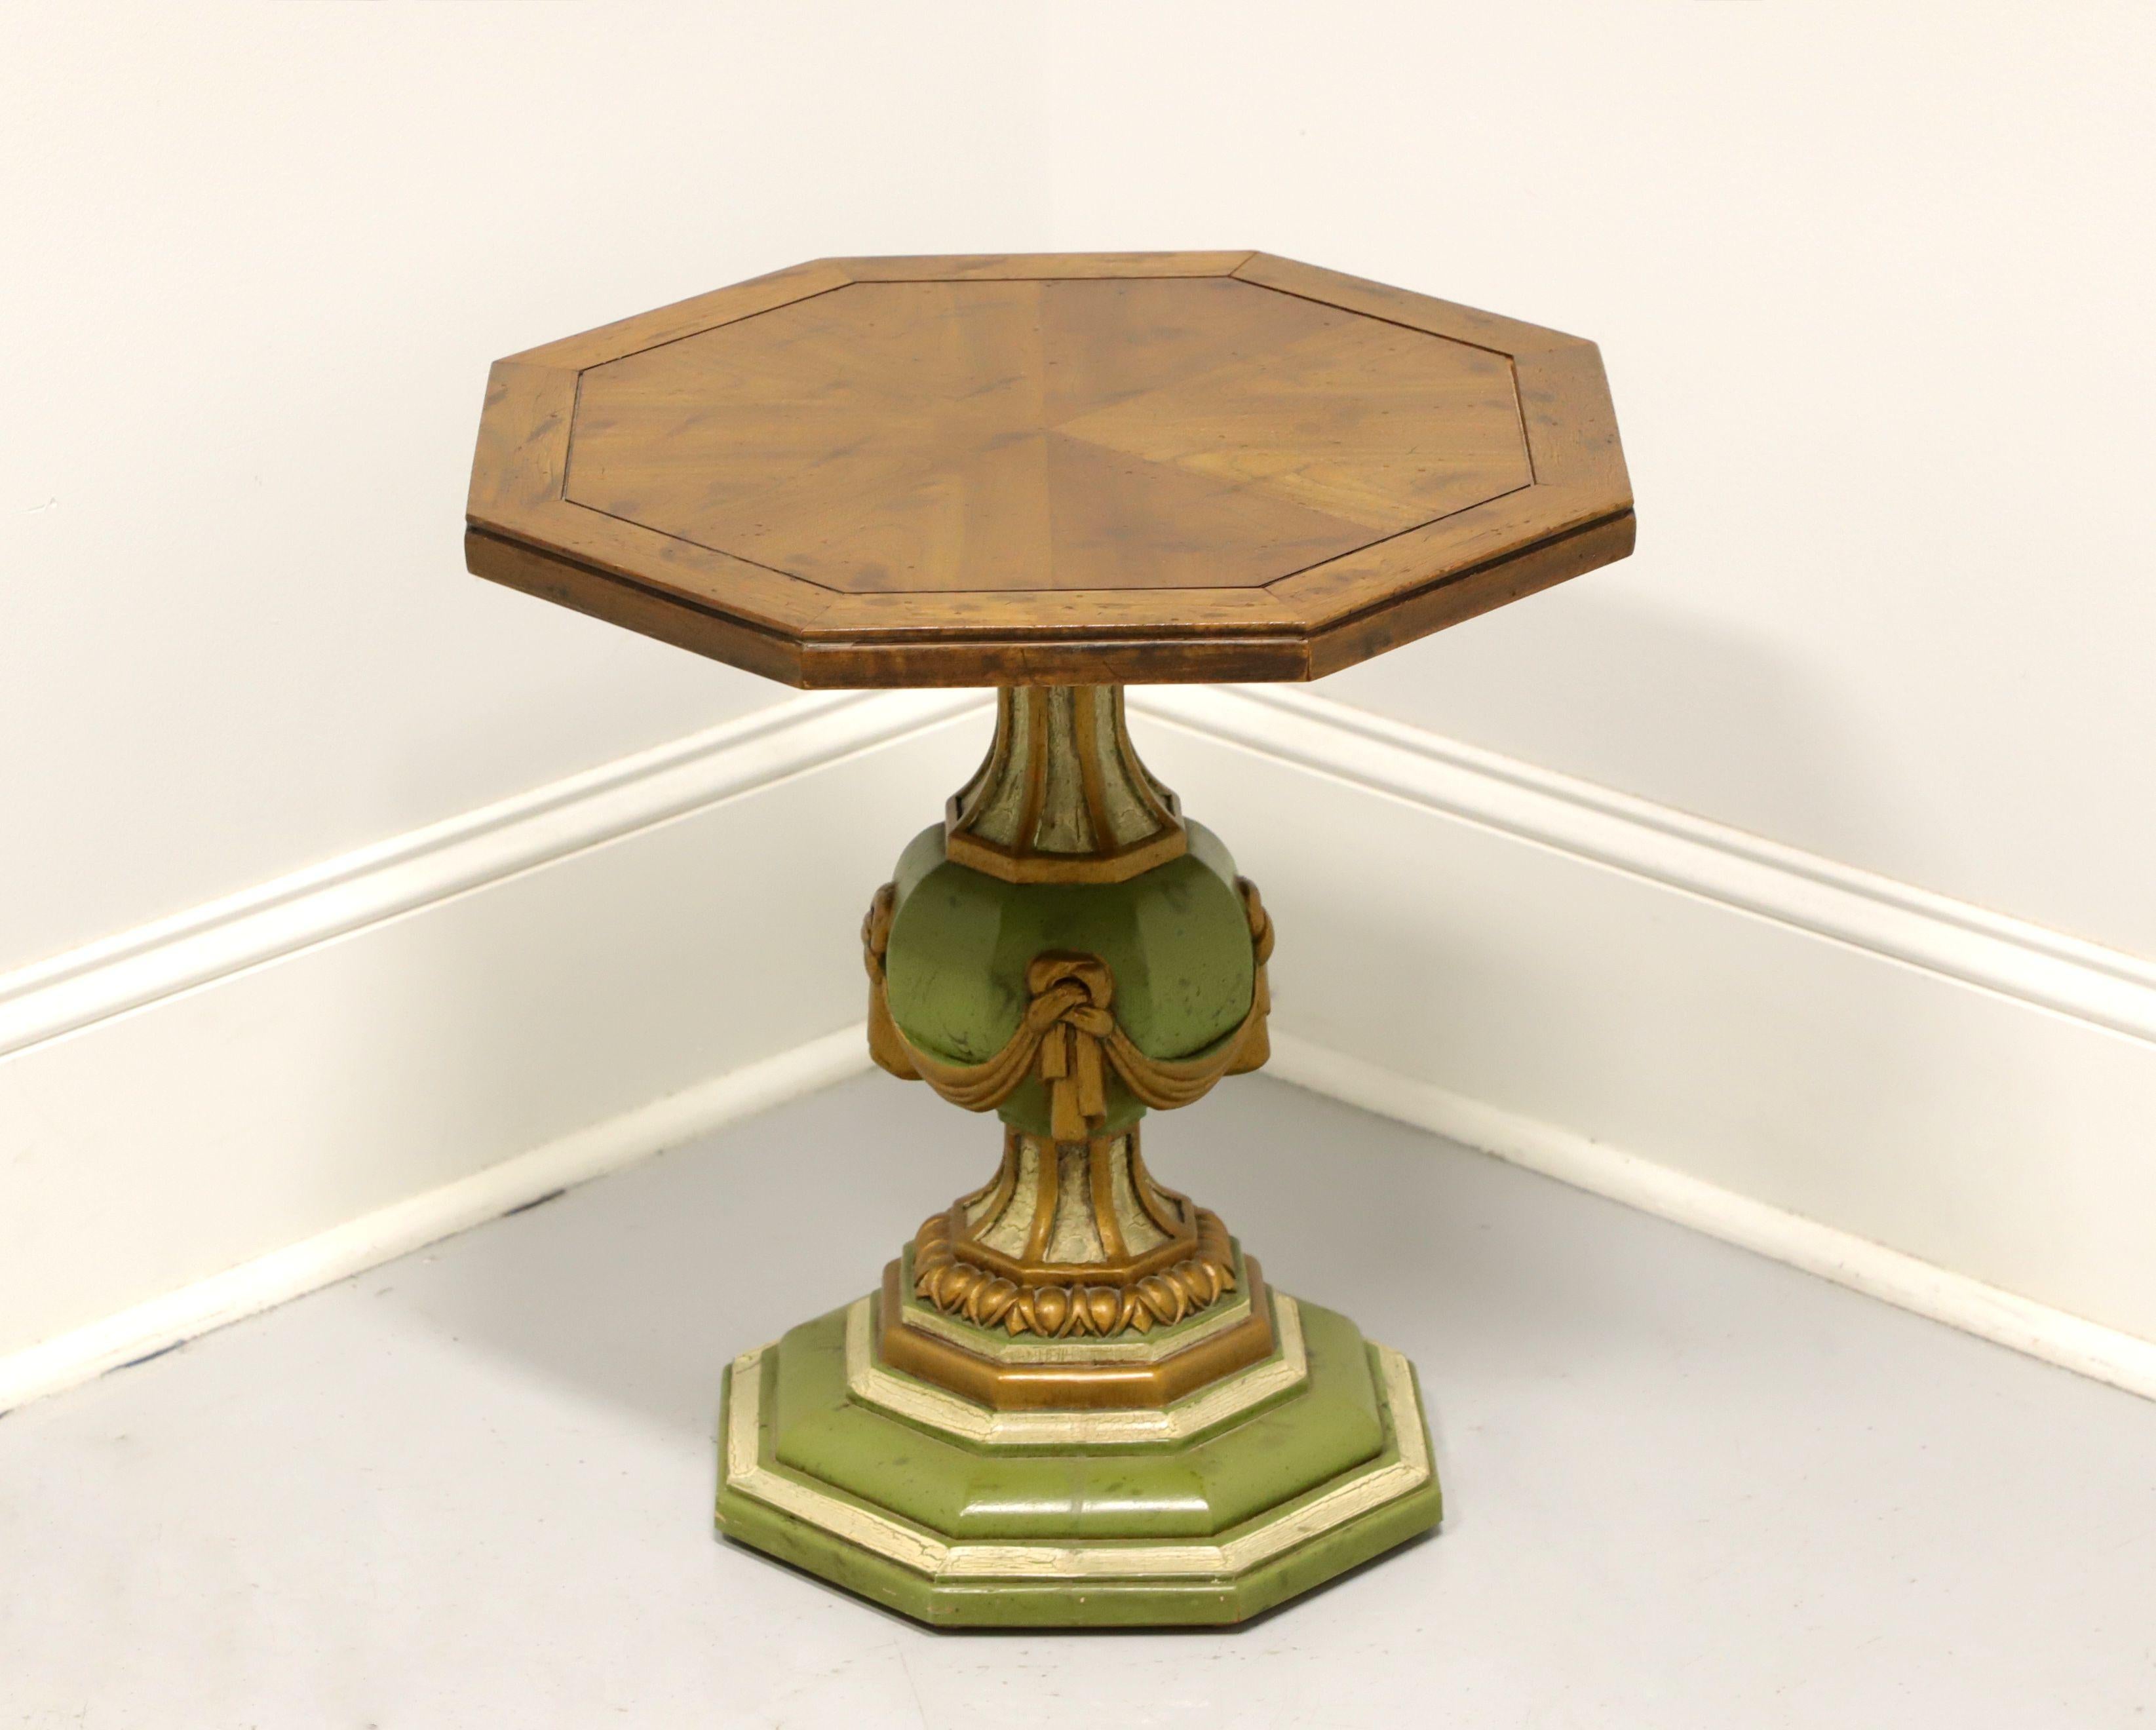 A Spanish style octagonal shaped accent table by Drexel, from their Velero Collection. Pecan with a distressed finish, banded & inlaid top, decorative pedestal base painted green, gold and white. Made in North Carolina, USA, circa 1989.

Style #: